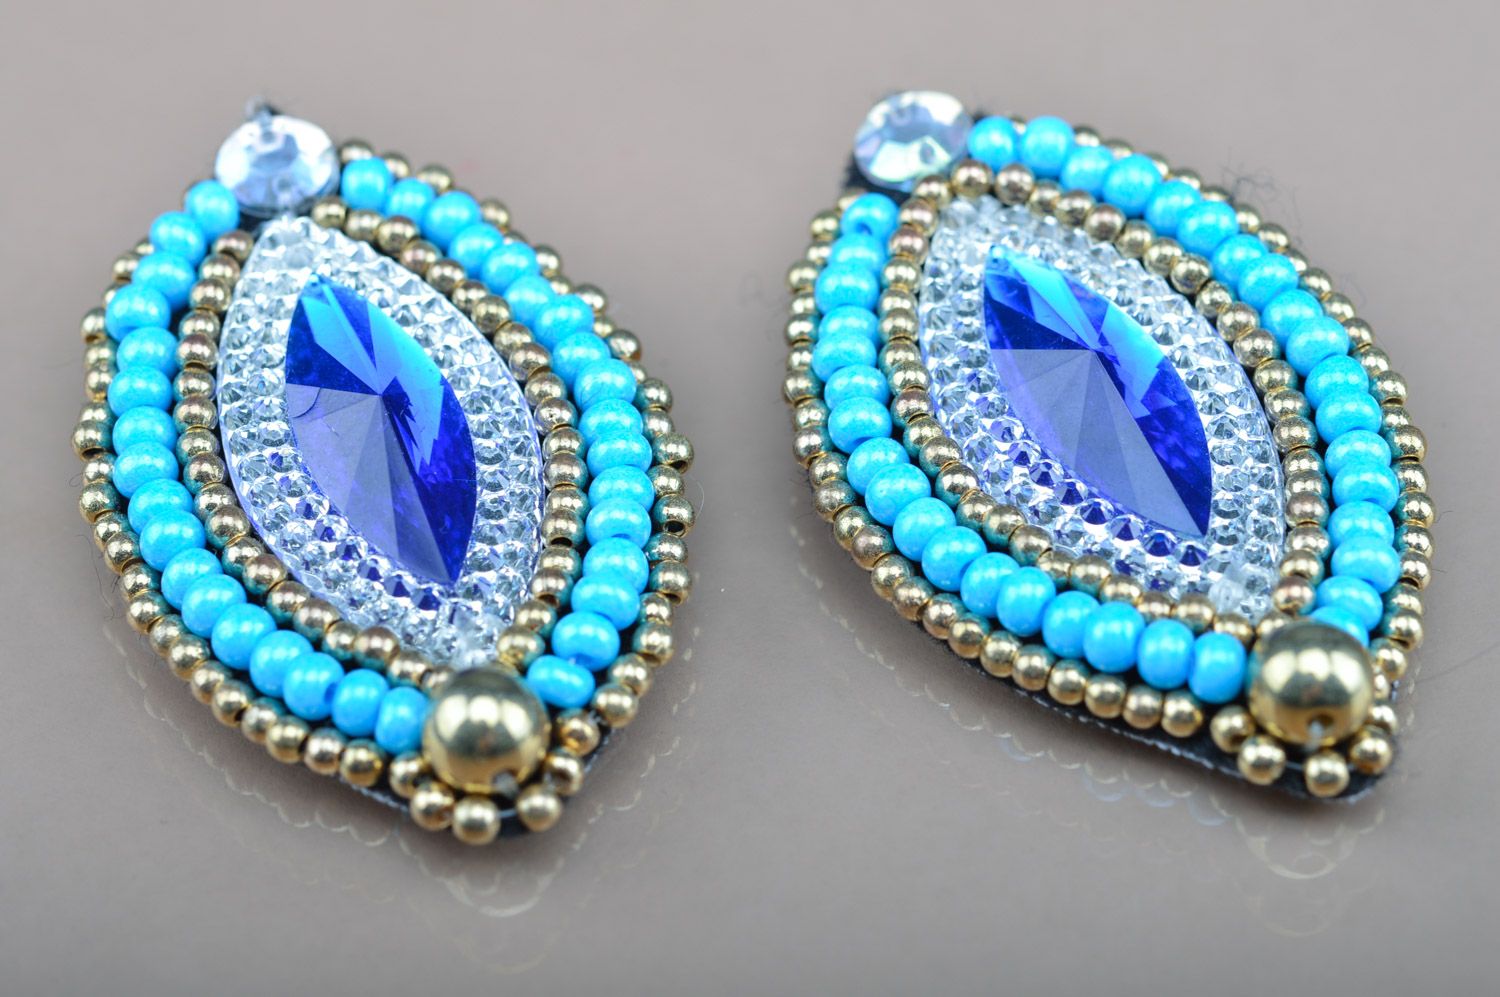 Handmade large stud earrings with beads and stones in blue color palette photo 1